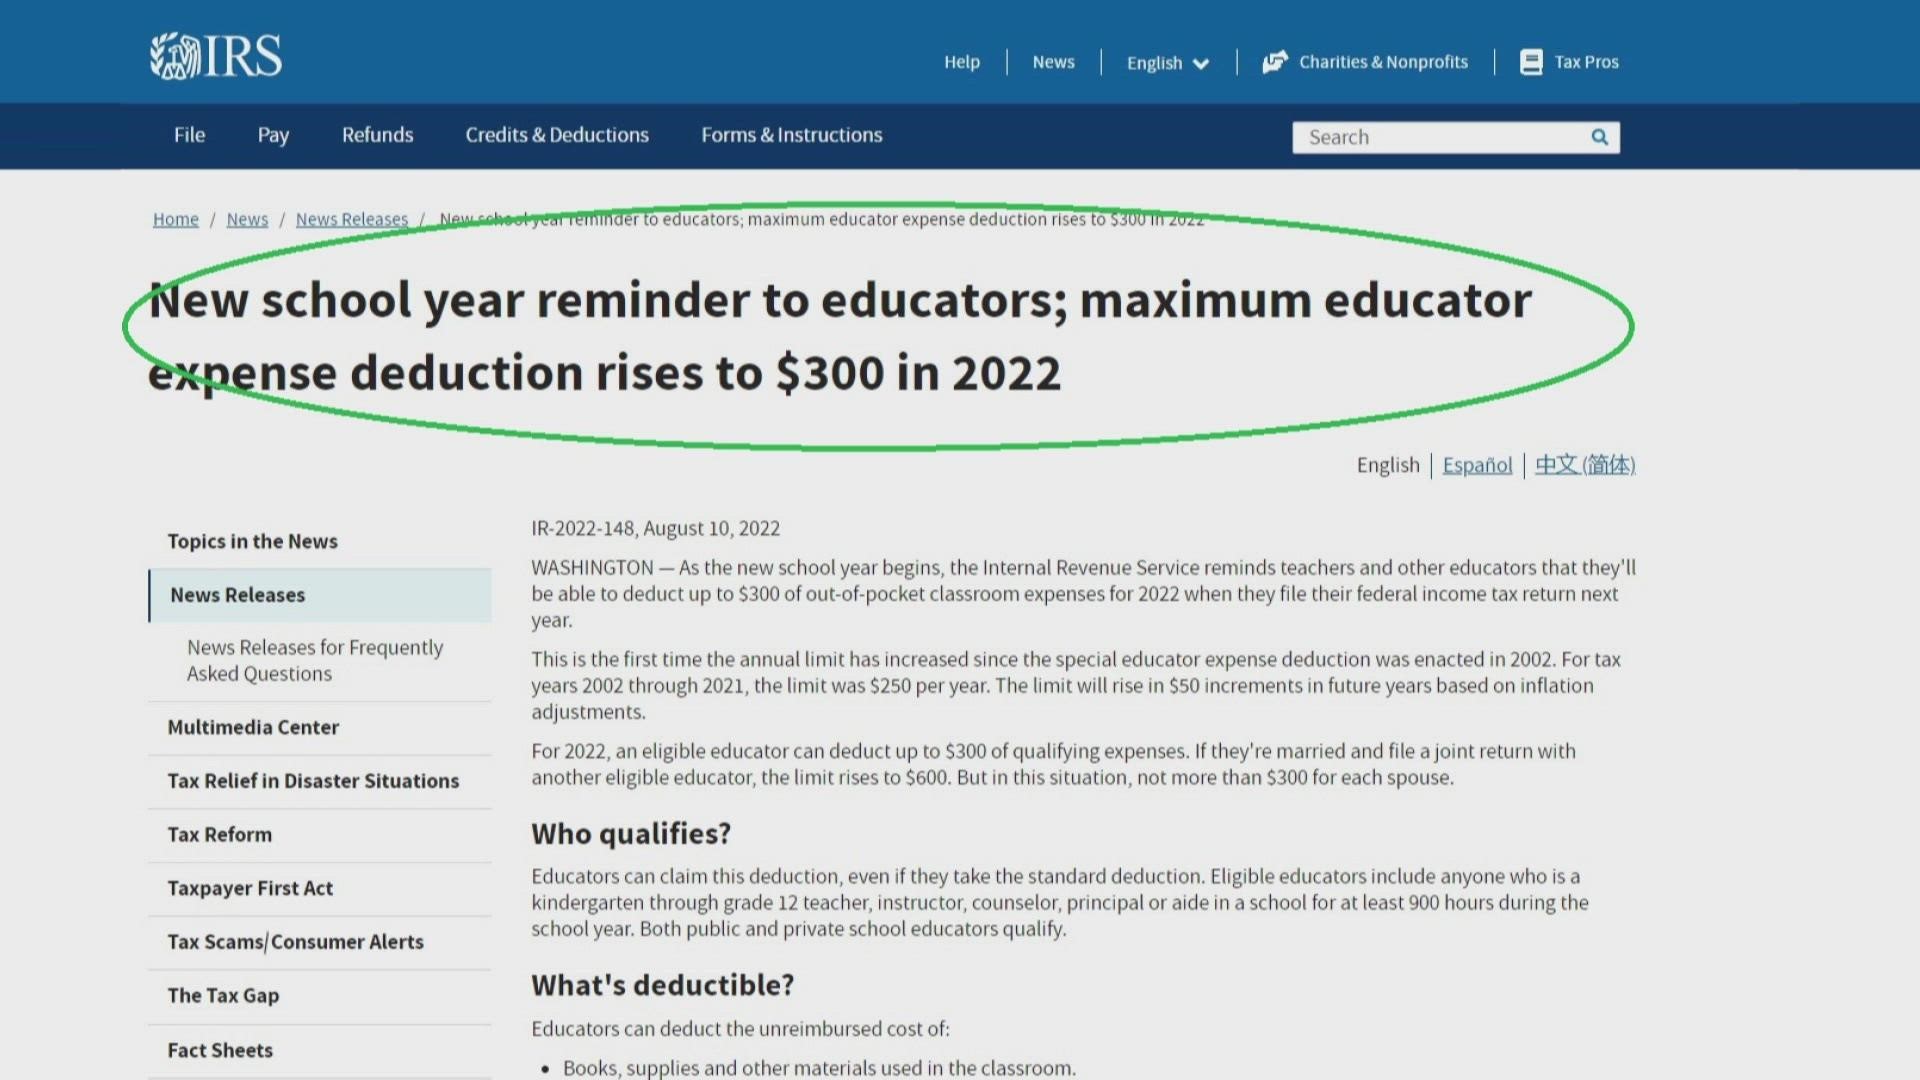 Educators can deduct up to $300 of out-of-pocket expenses this year on their 2022 taxes.